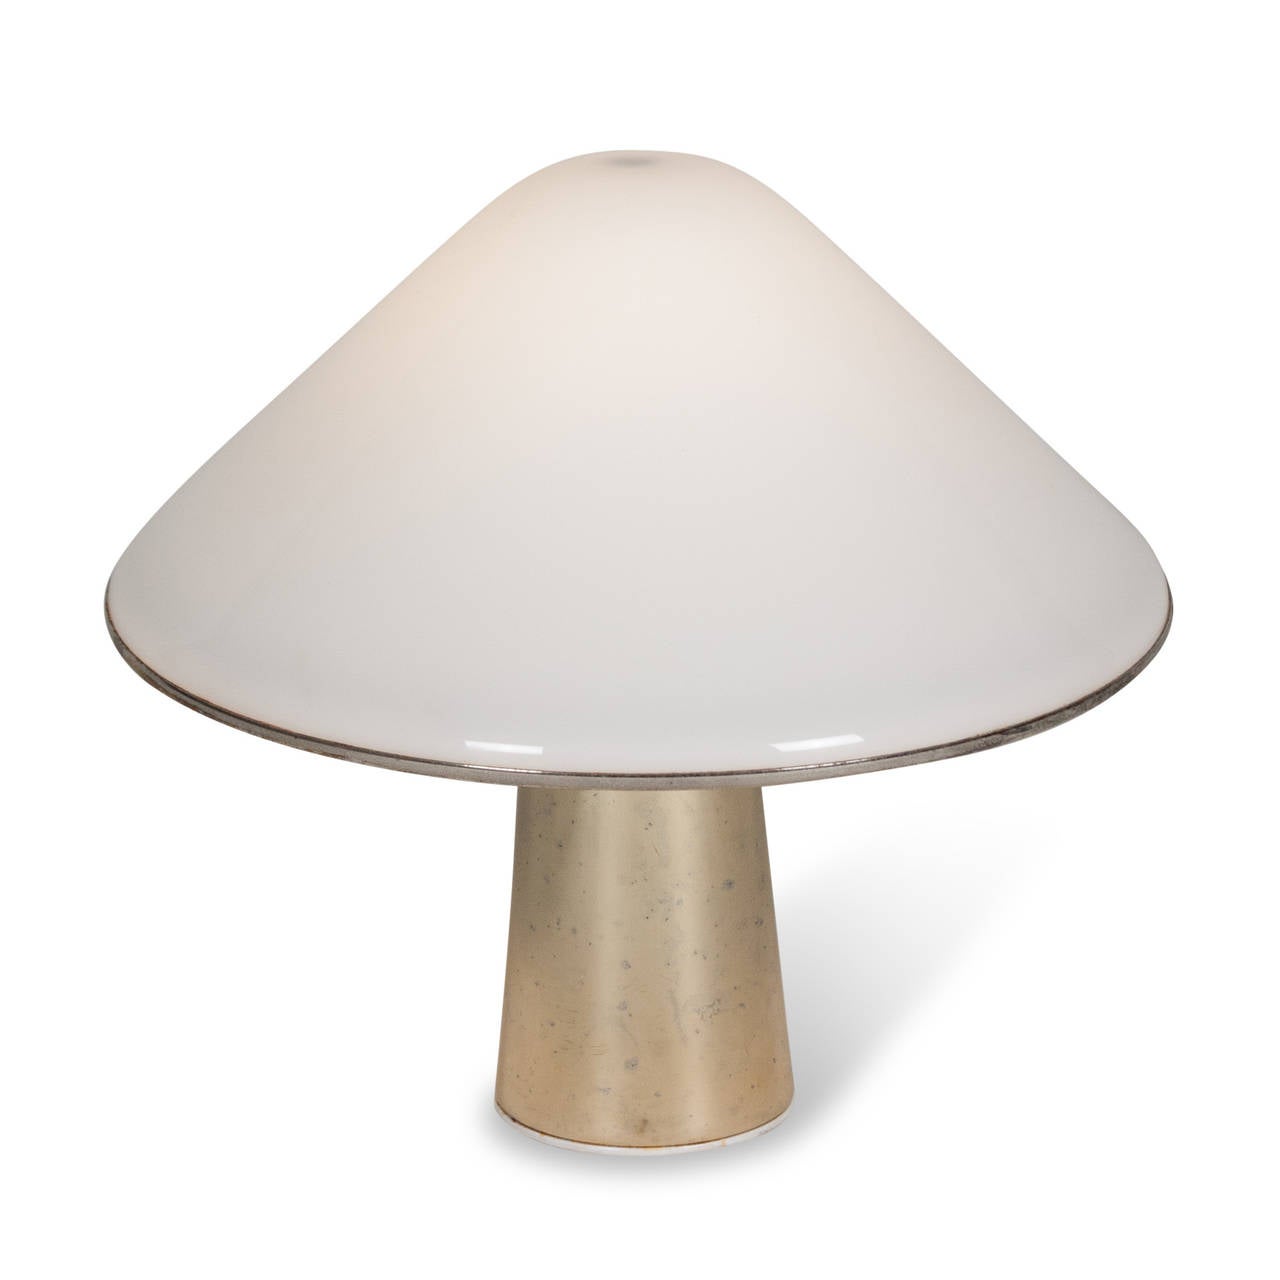 Frosted plexi cone shaped lamp, on slightly tapered lacquered gold tinted metal column base. By Guzzini, Italian, 1970s. Overall height 12 in, diameter of shade 11 1/2 in. (Item #2352)